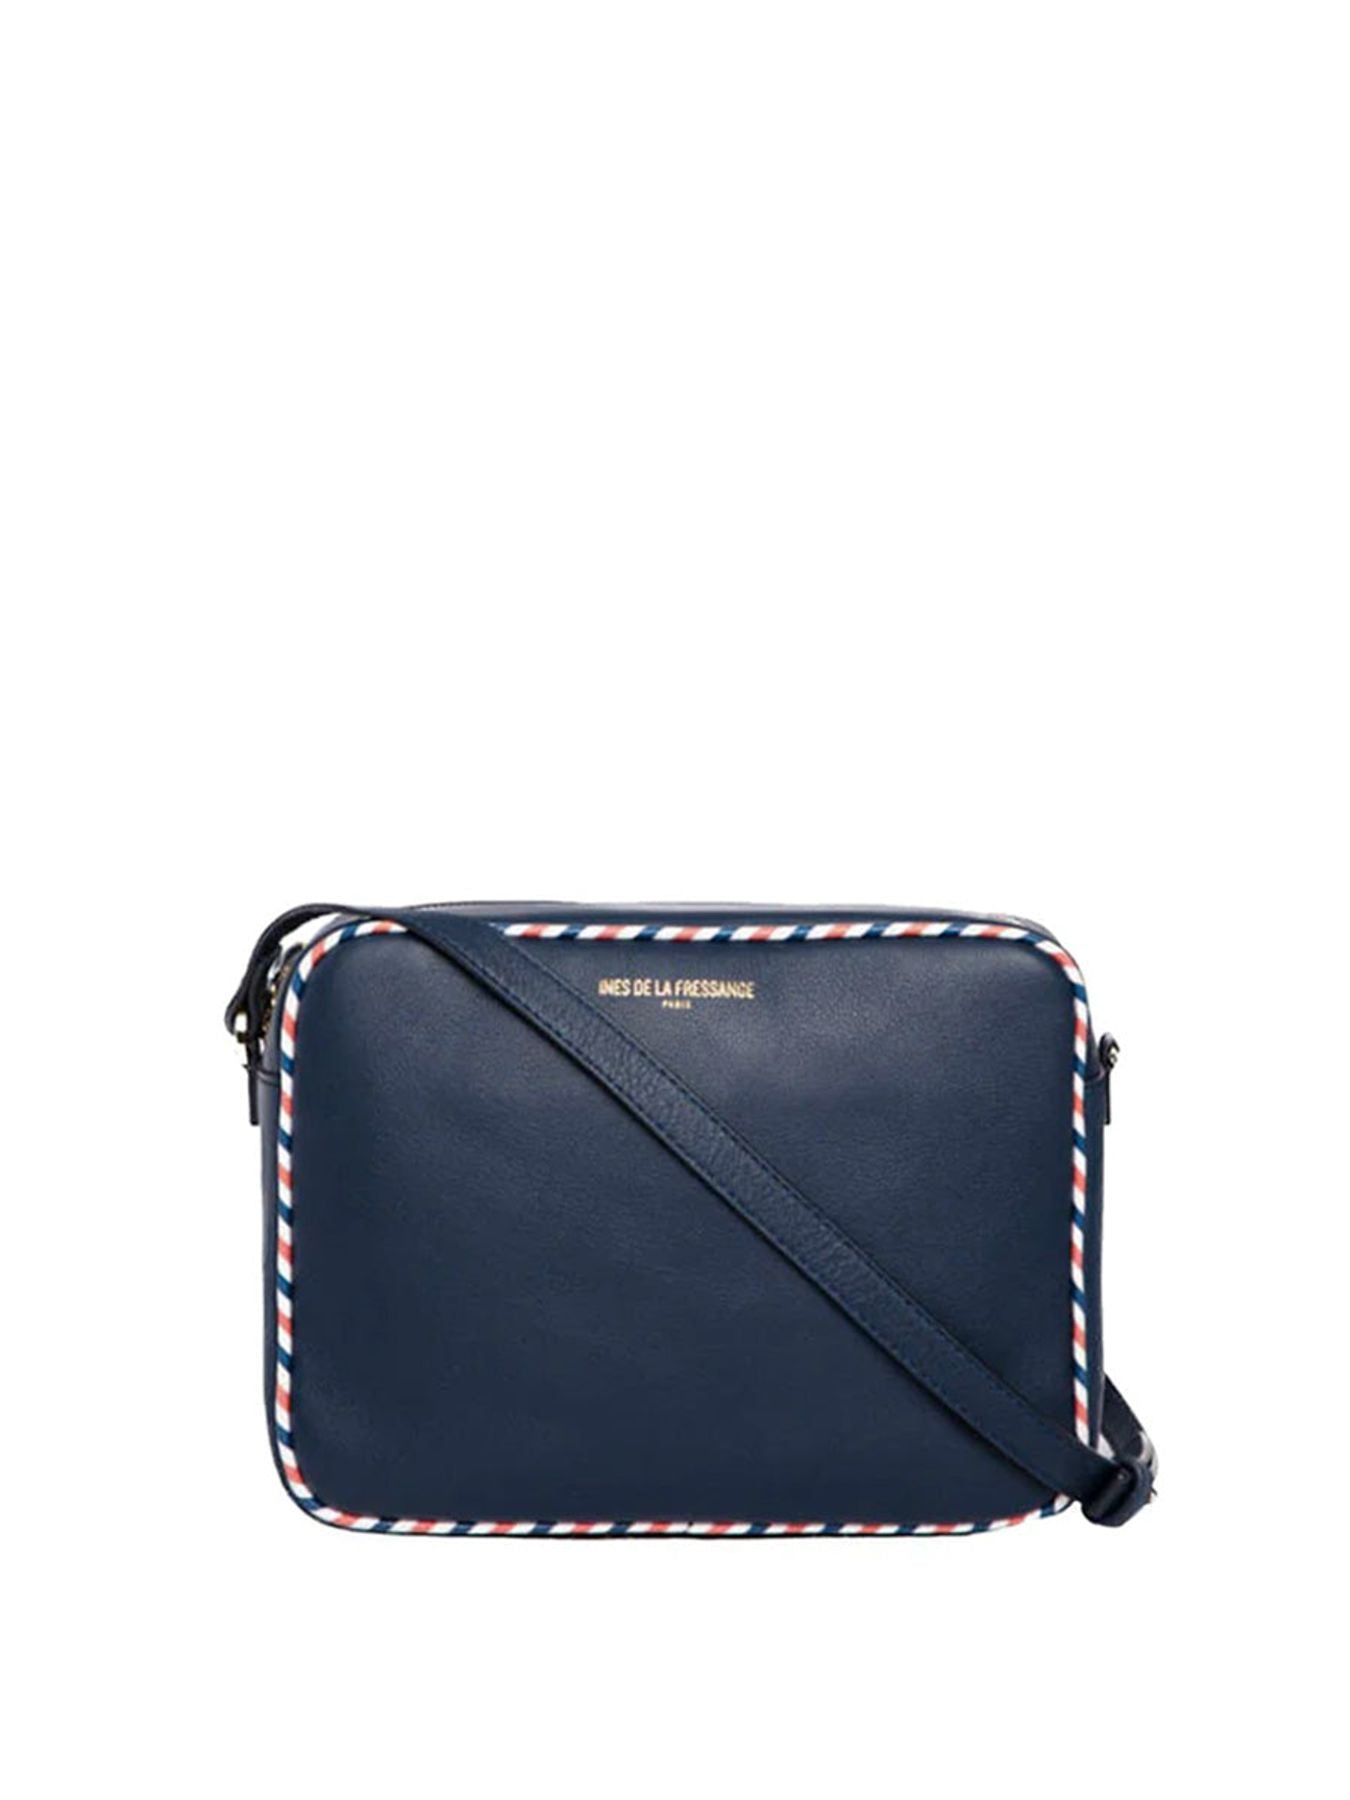 bag-marcia-leather-blue-navy